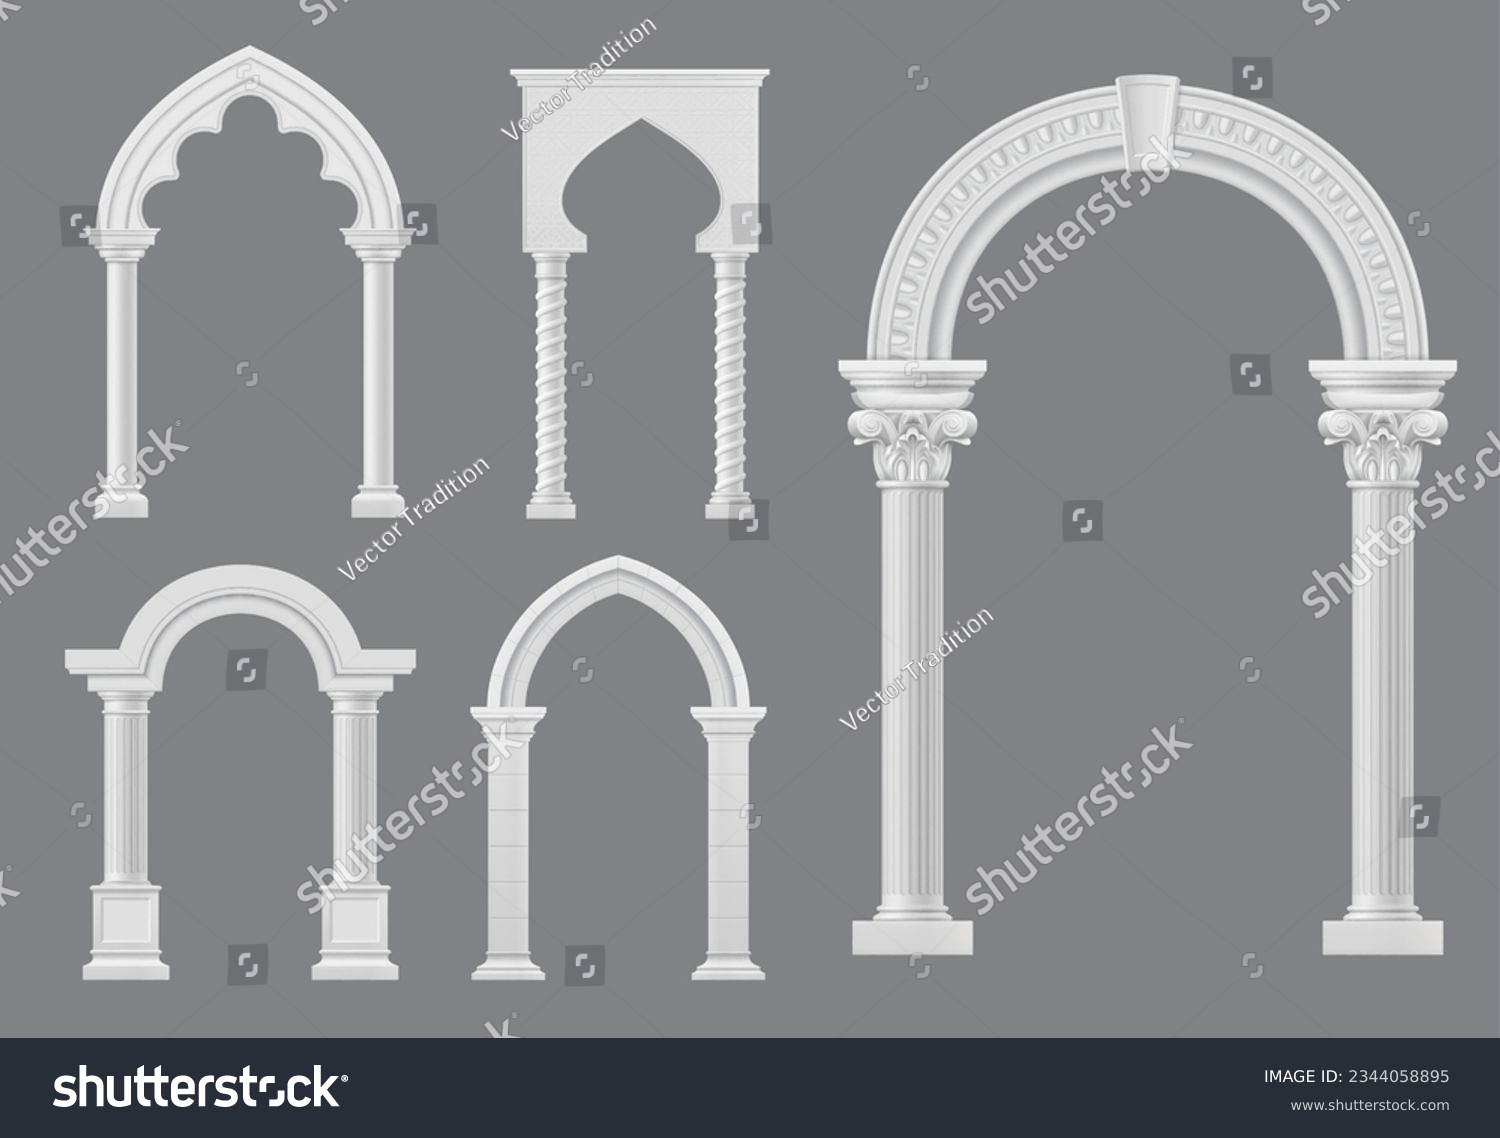 SVG of Castle and palace white marble arch, medieval archway or antique greek roman and arabian columns, vector architecture. Medieval arches on pillars, ancient stone entrance gates or marble archway svg